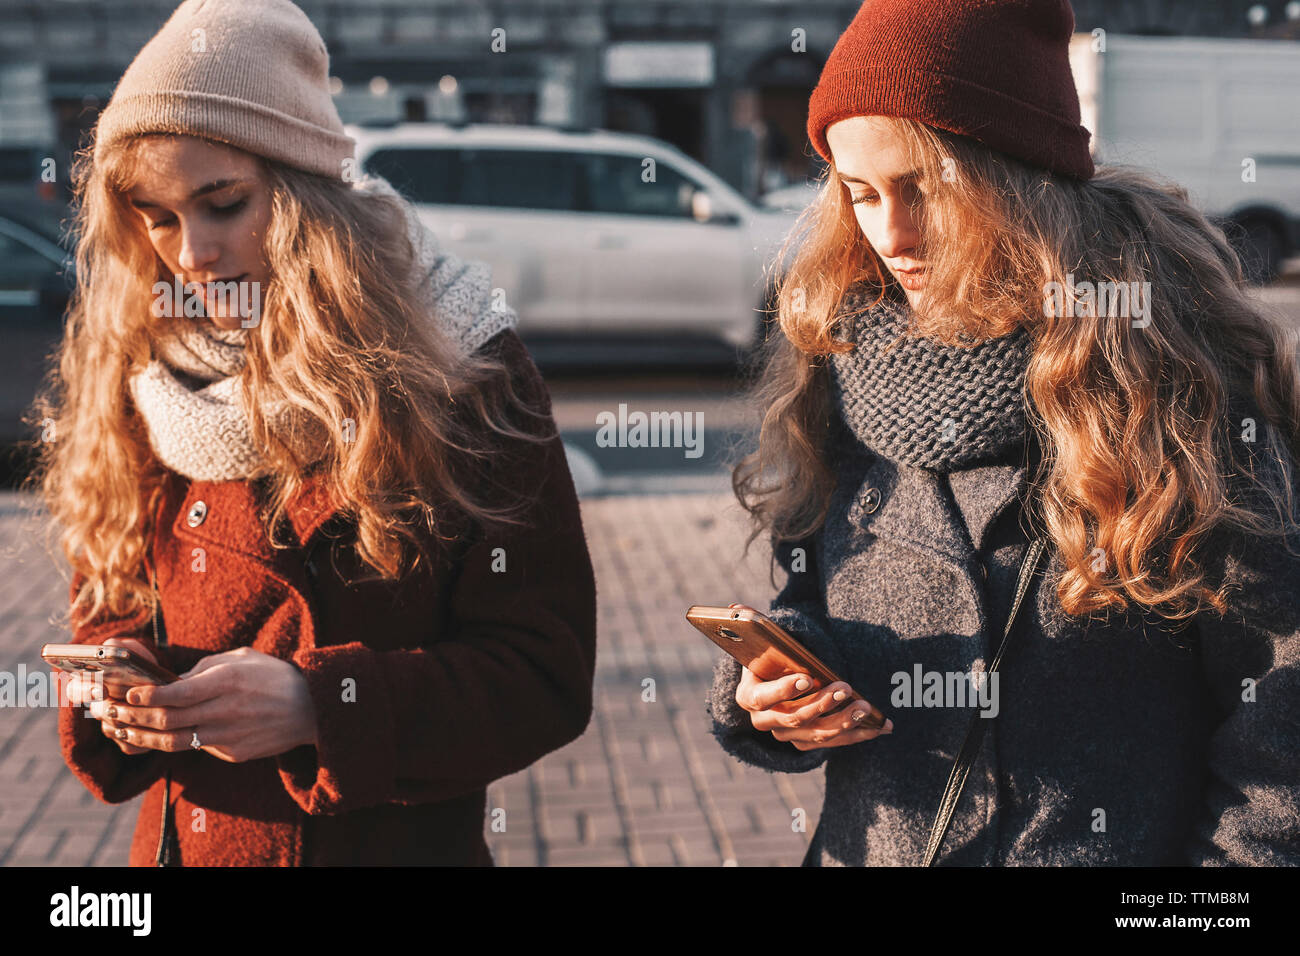 Sisters using mobile phones while standing on city street Stock Photo